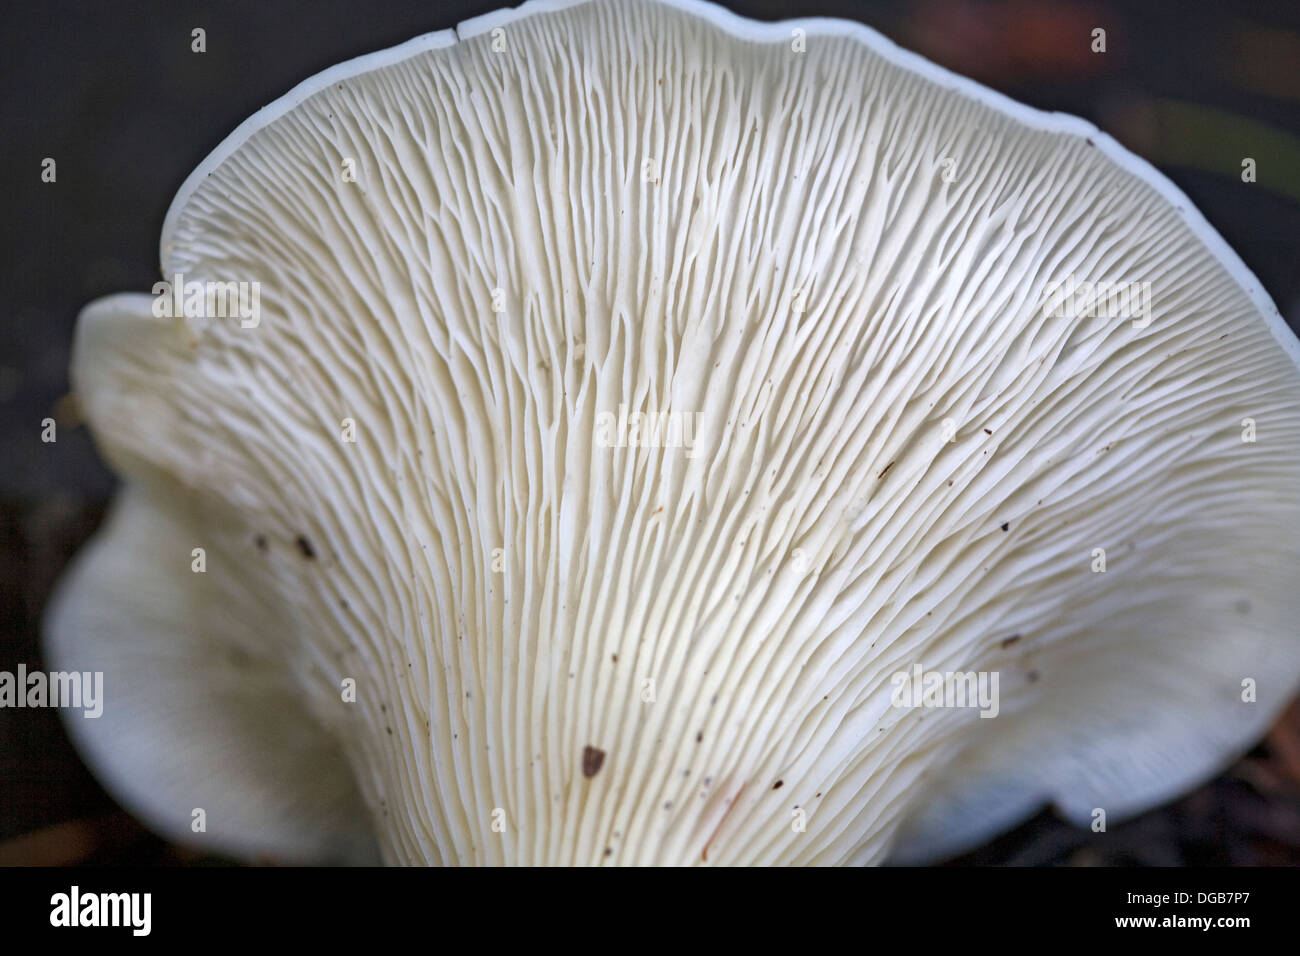 A wild mushroom with decurrent gills Stock Photo